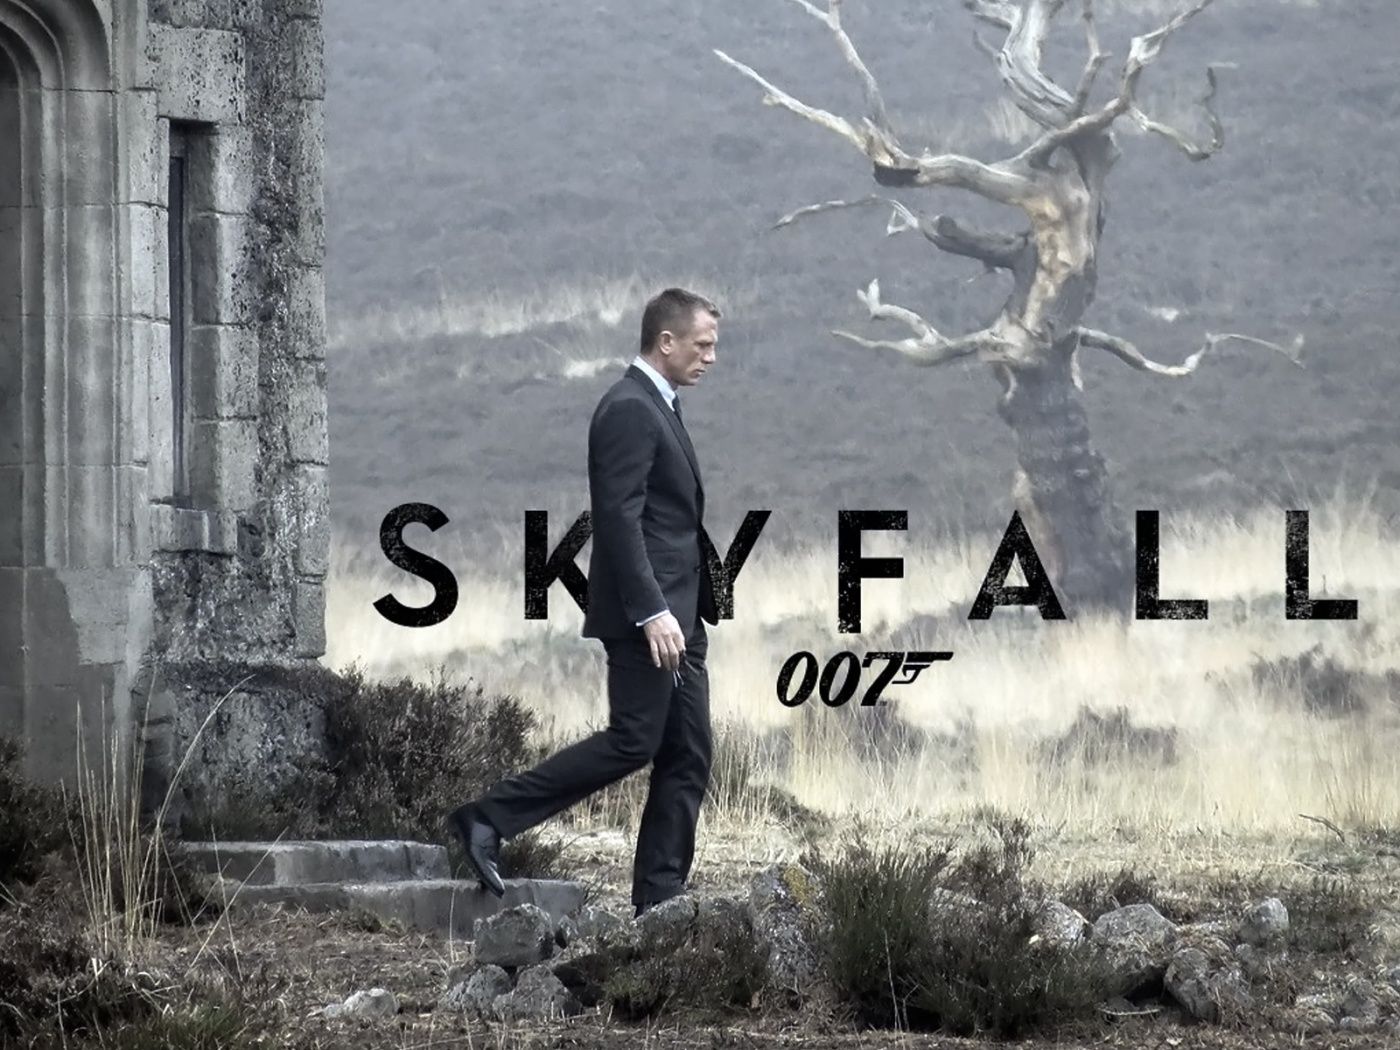 HD Wallpapers for iPhone 5 - James Bond 007 Skyfall Wallpapers